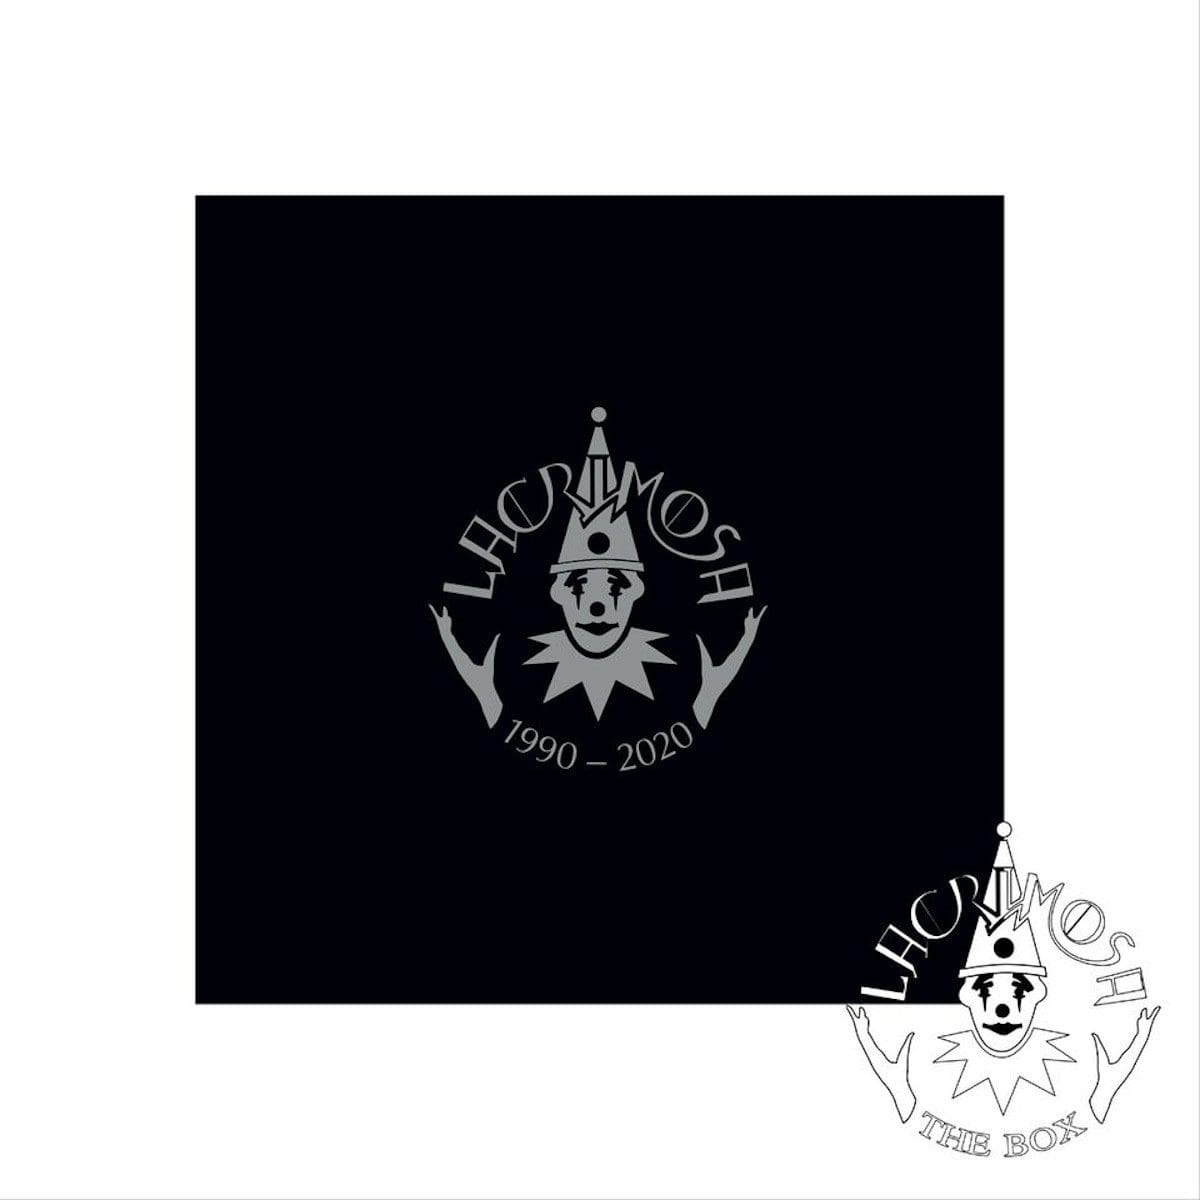 Limited (and expensive) Lacrimosa anniversary box including much wanted piano demos